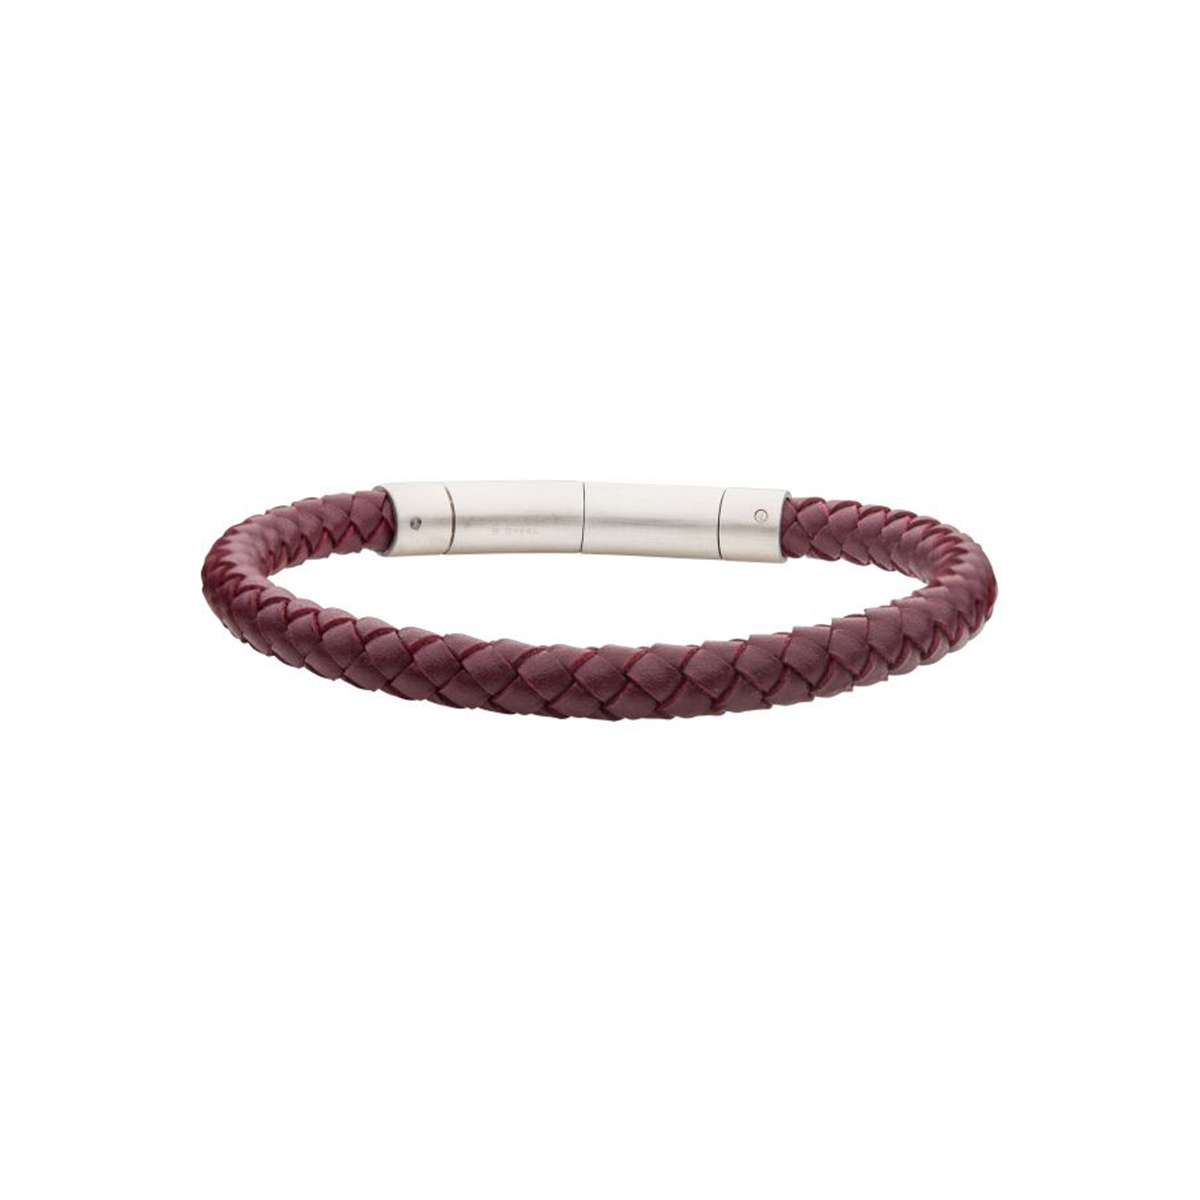 Stainless Steel and Burgundy Leather Bracelet